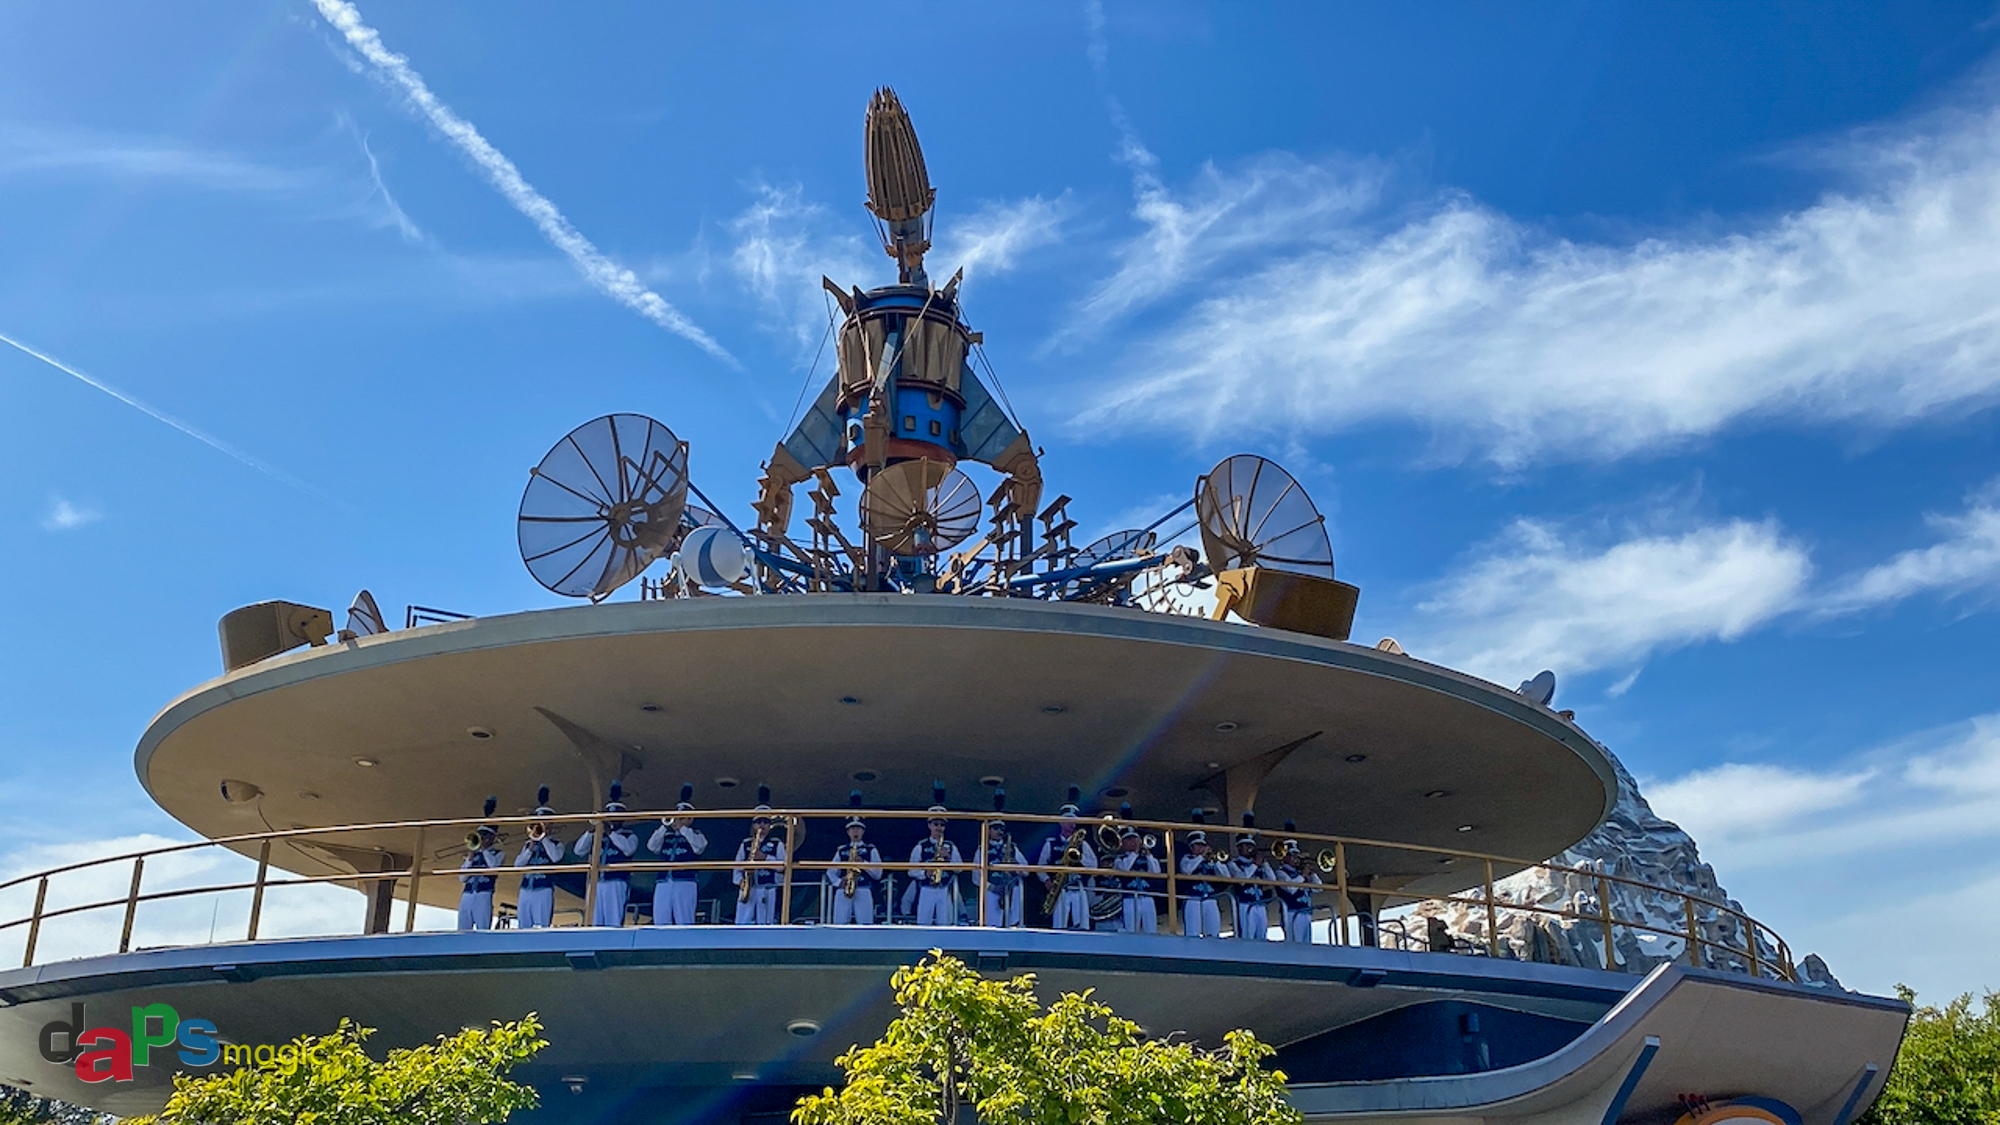 Disneyland Band Performs in New Tomorrowland Location